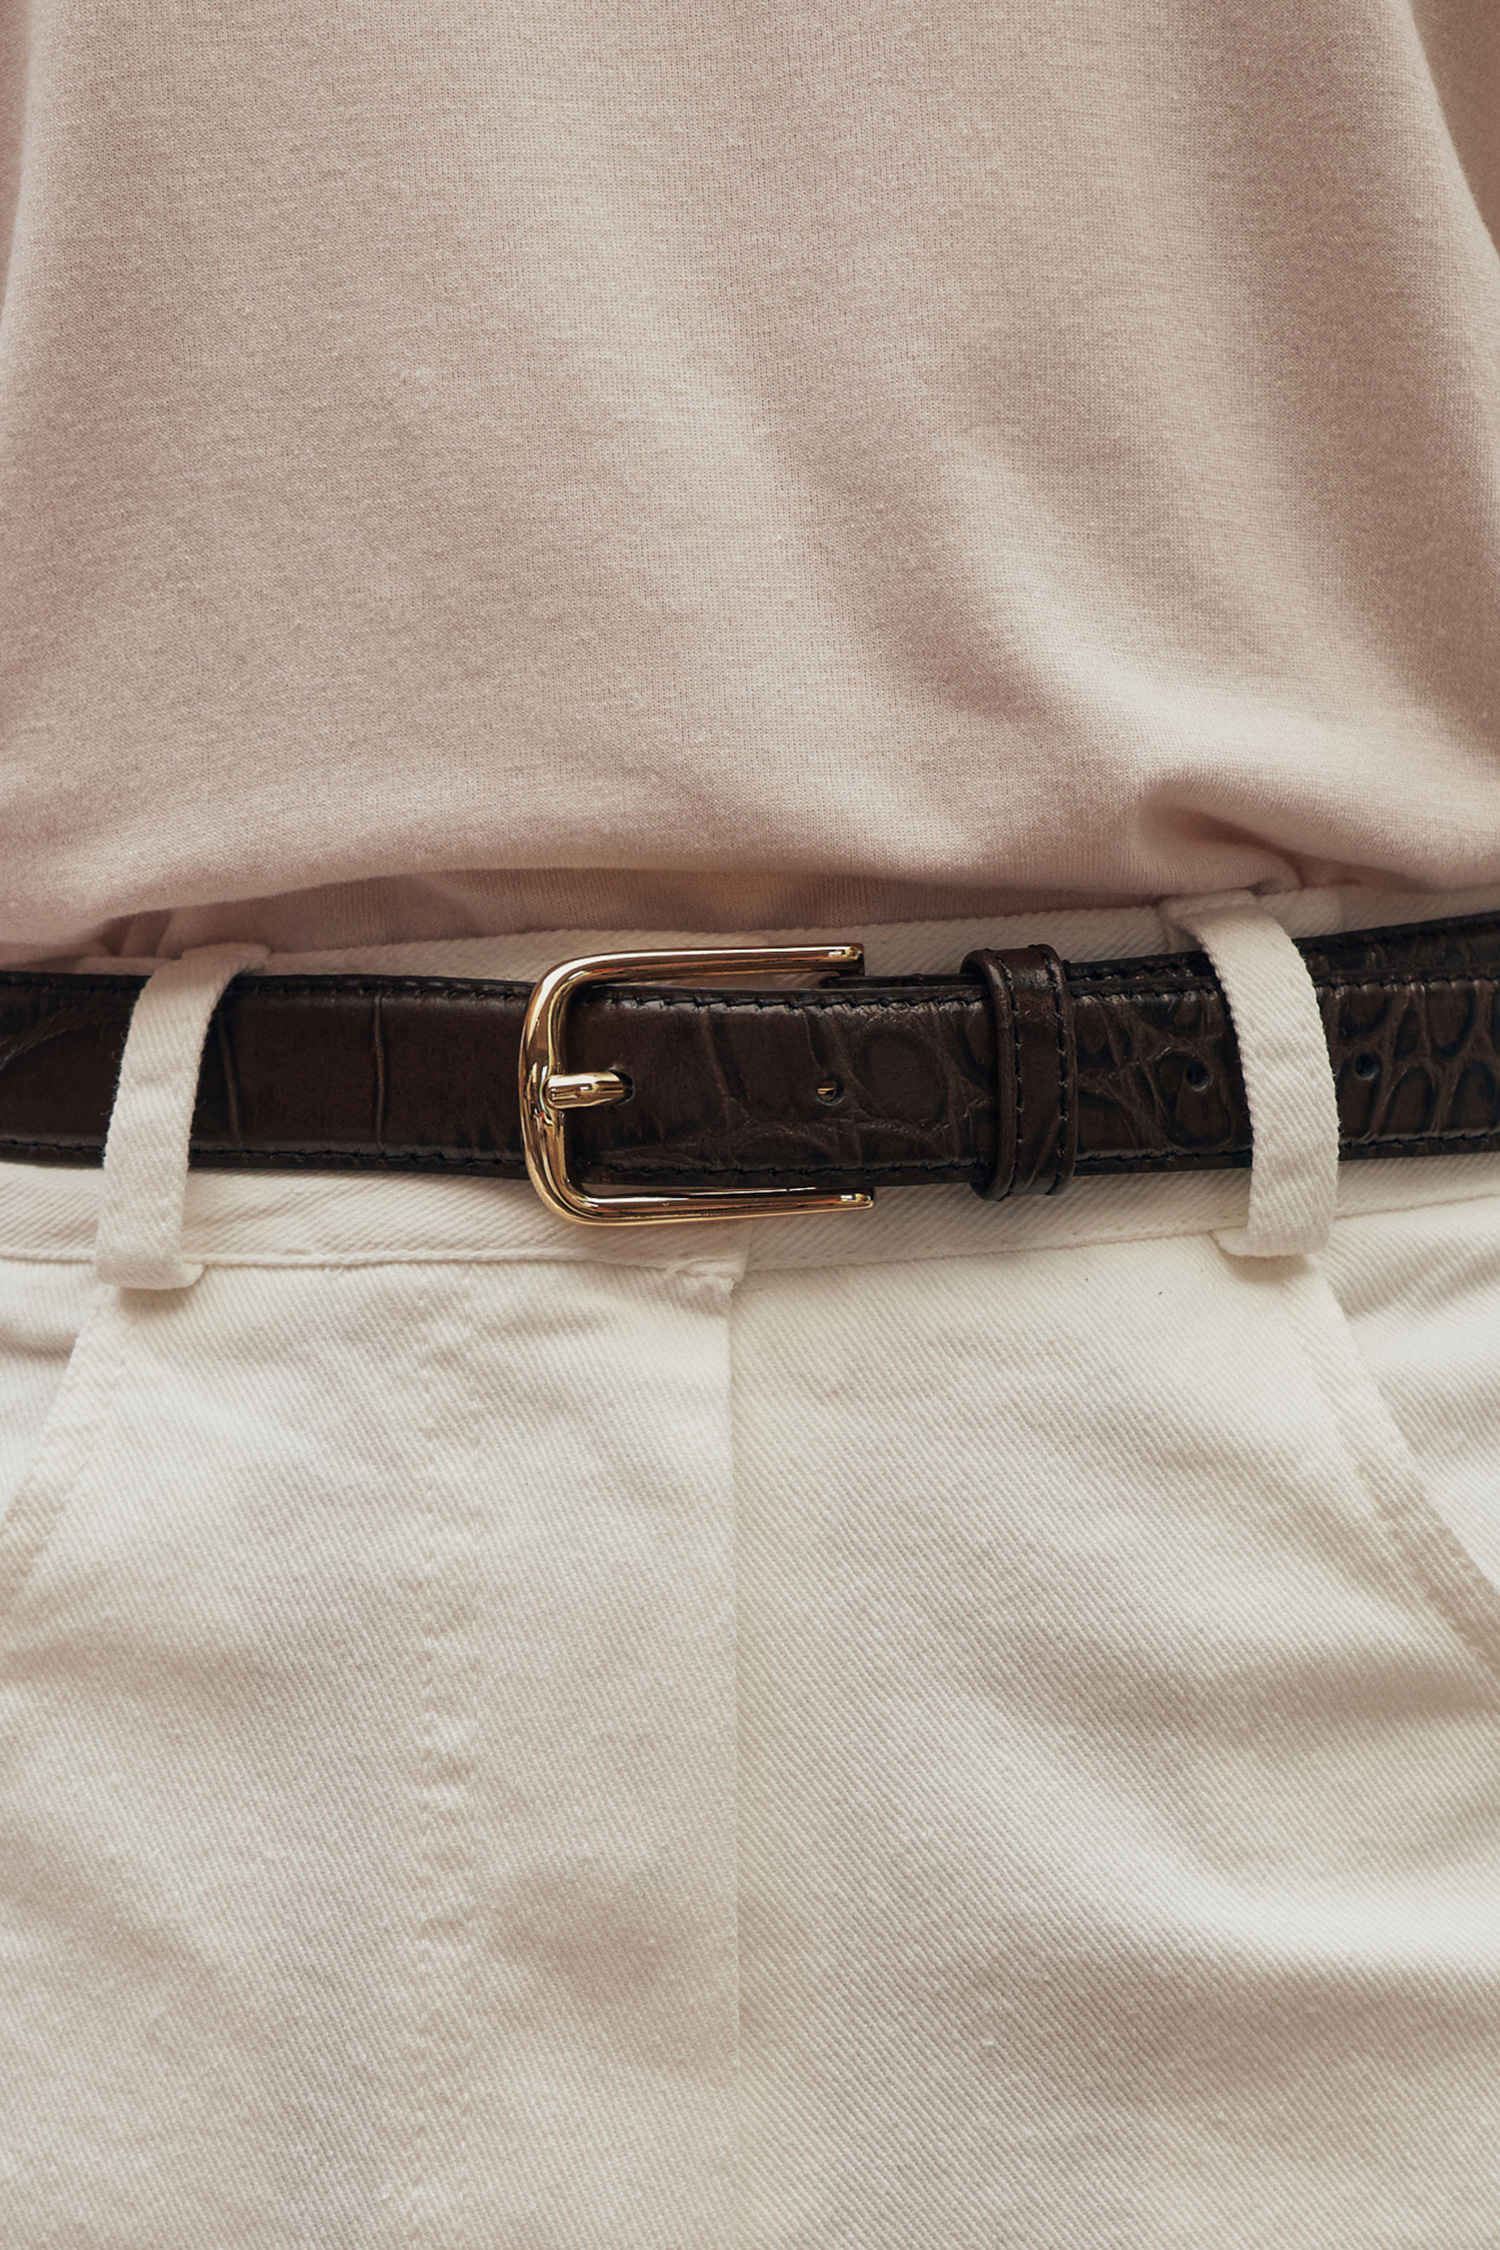 Casual pattern cow leather belt - 2 color